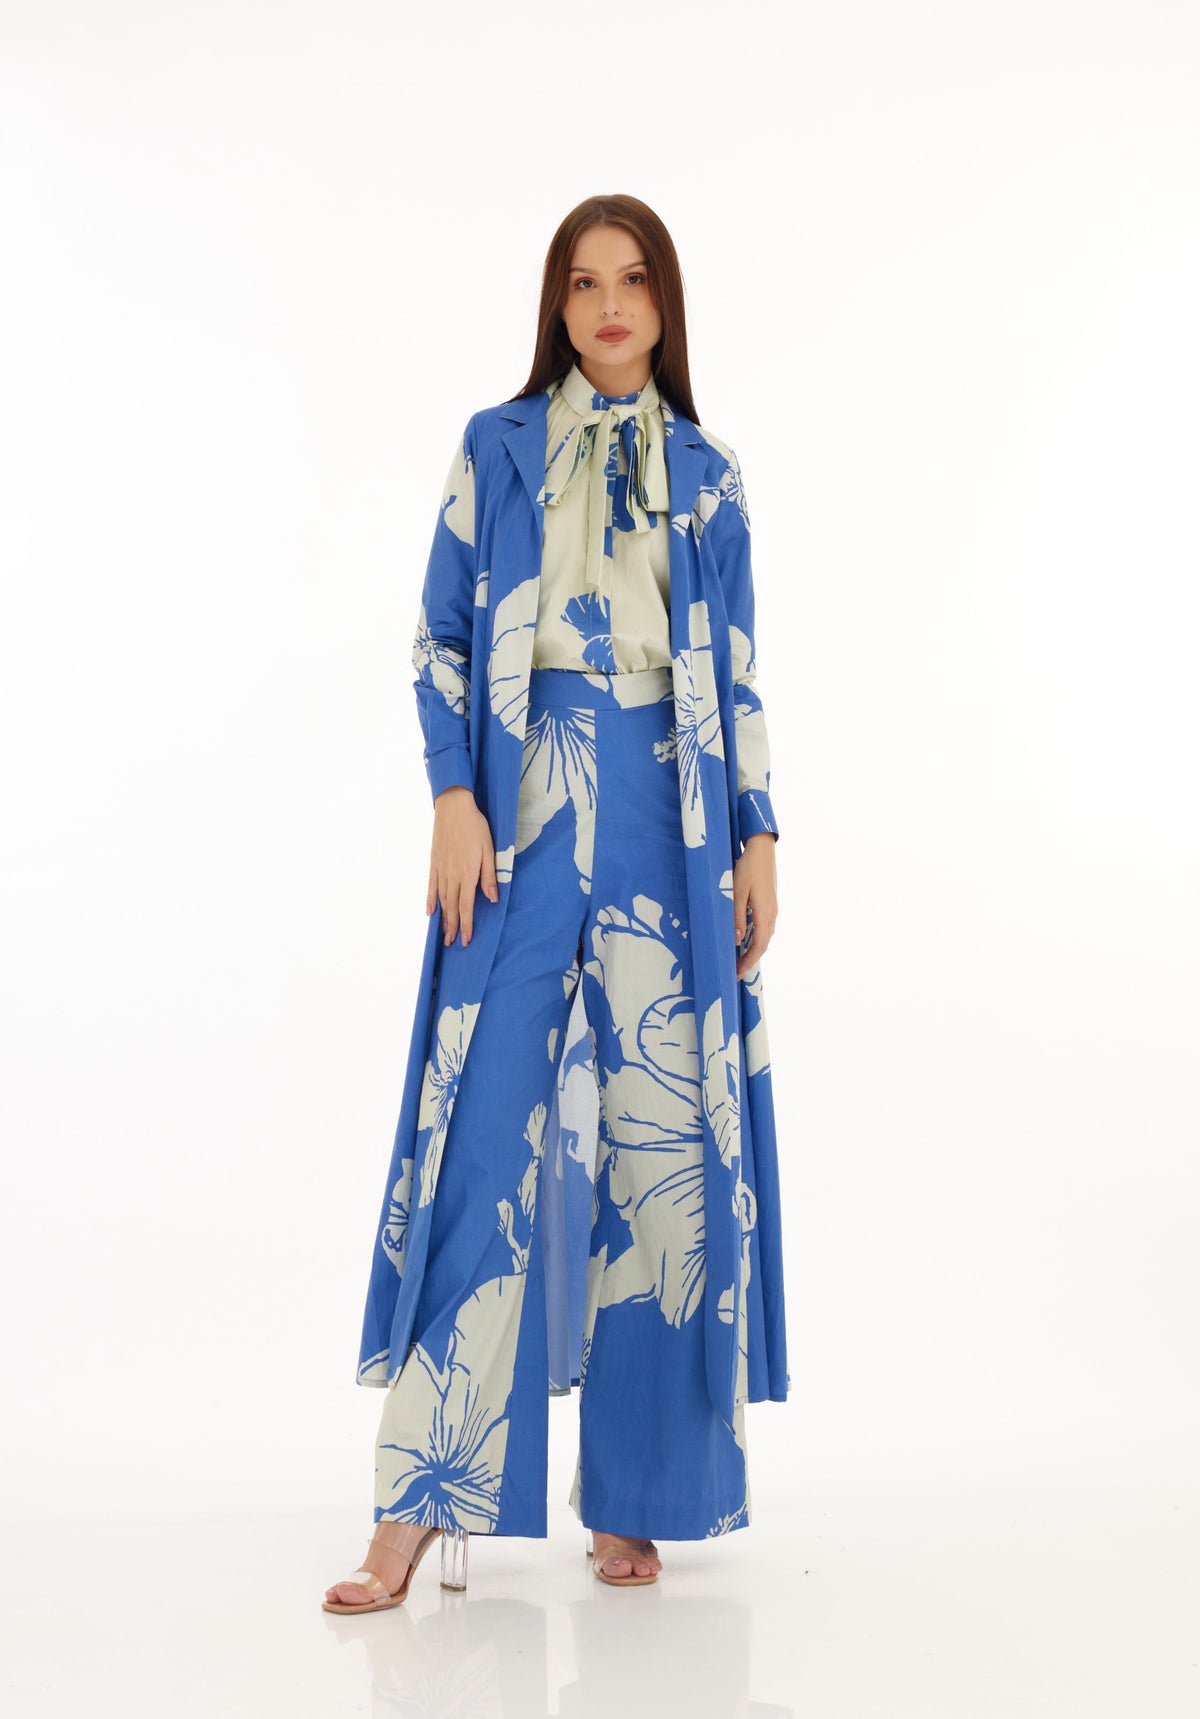 BLUE AND WHITE FLORAL CAPE